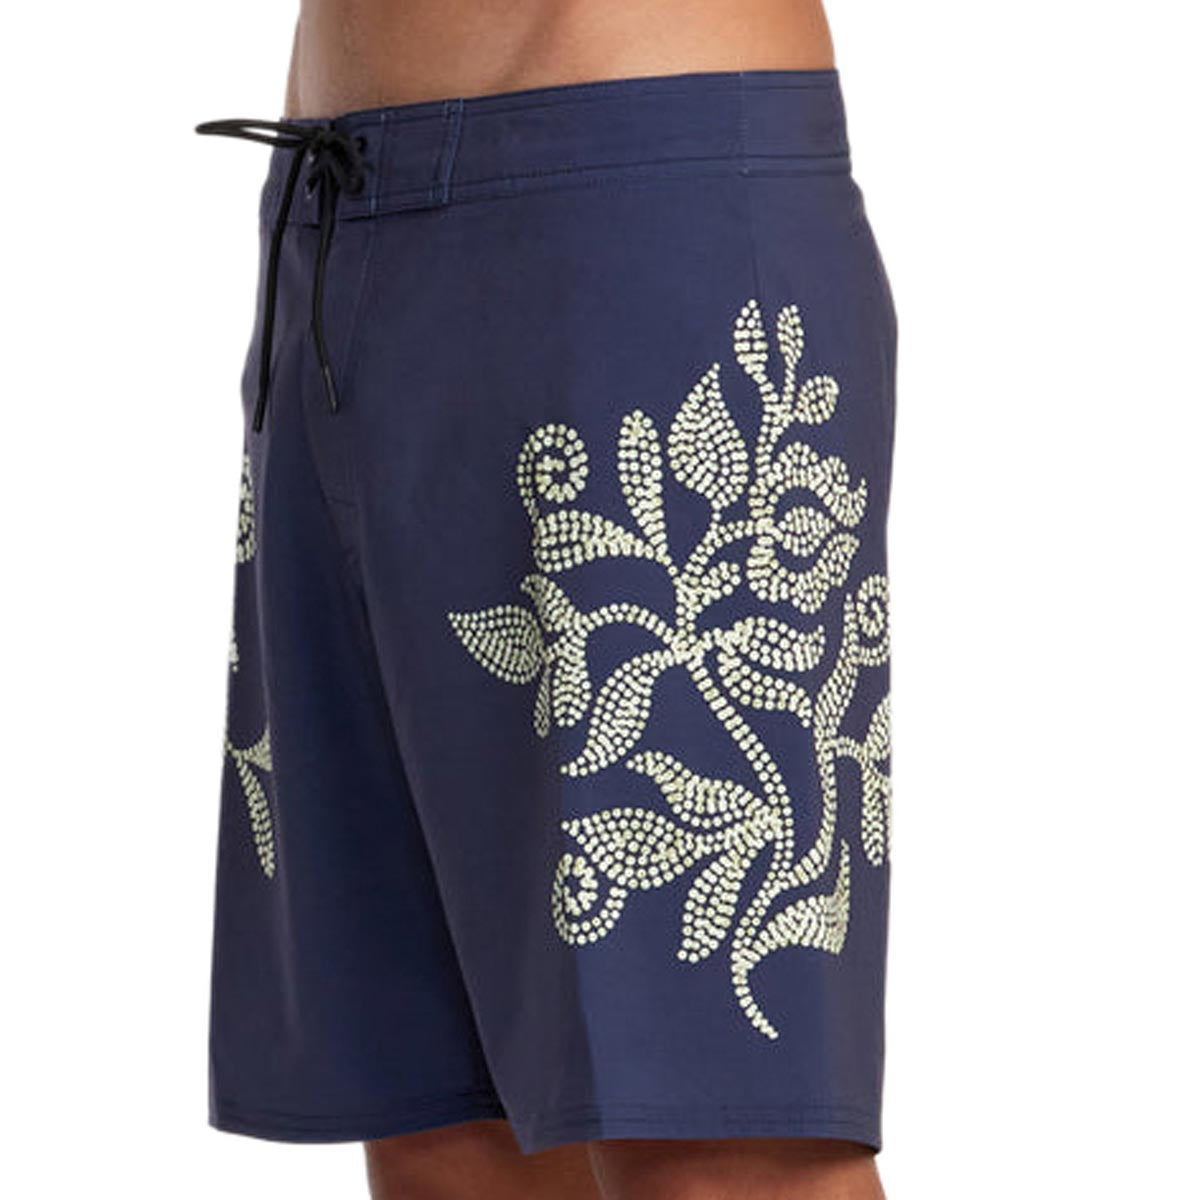 RVCA Displaced Board Shorts - Moody Blue image 5